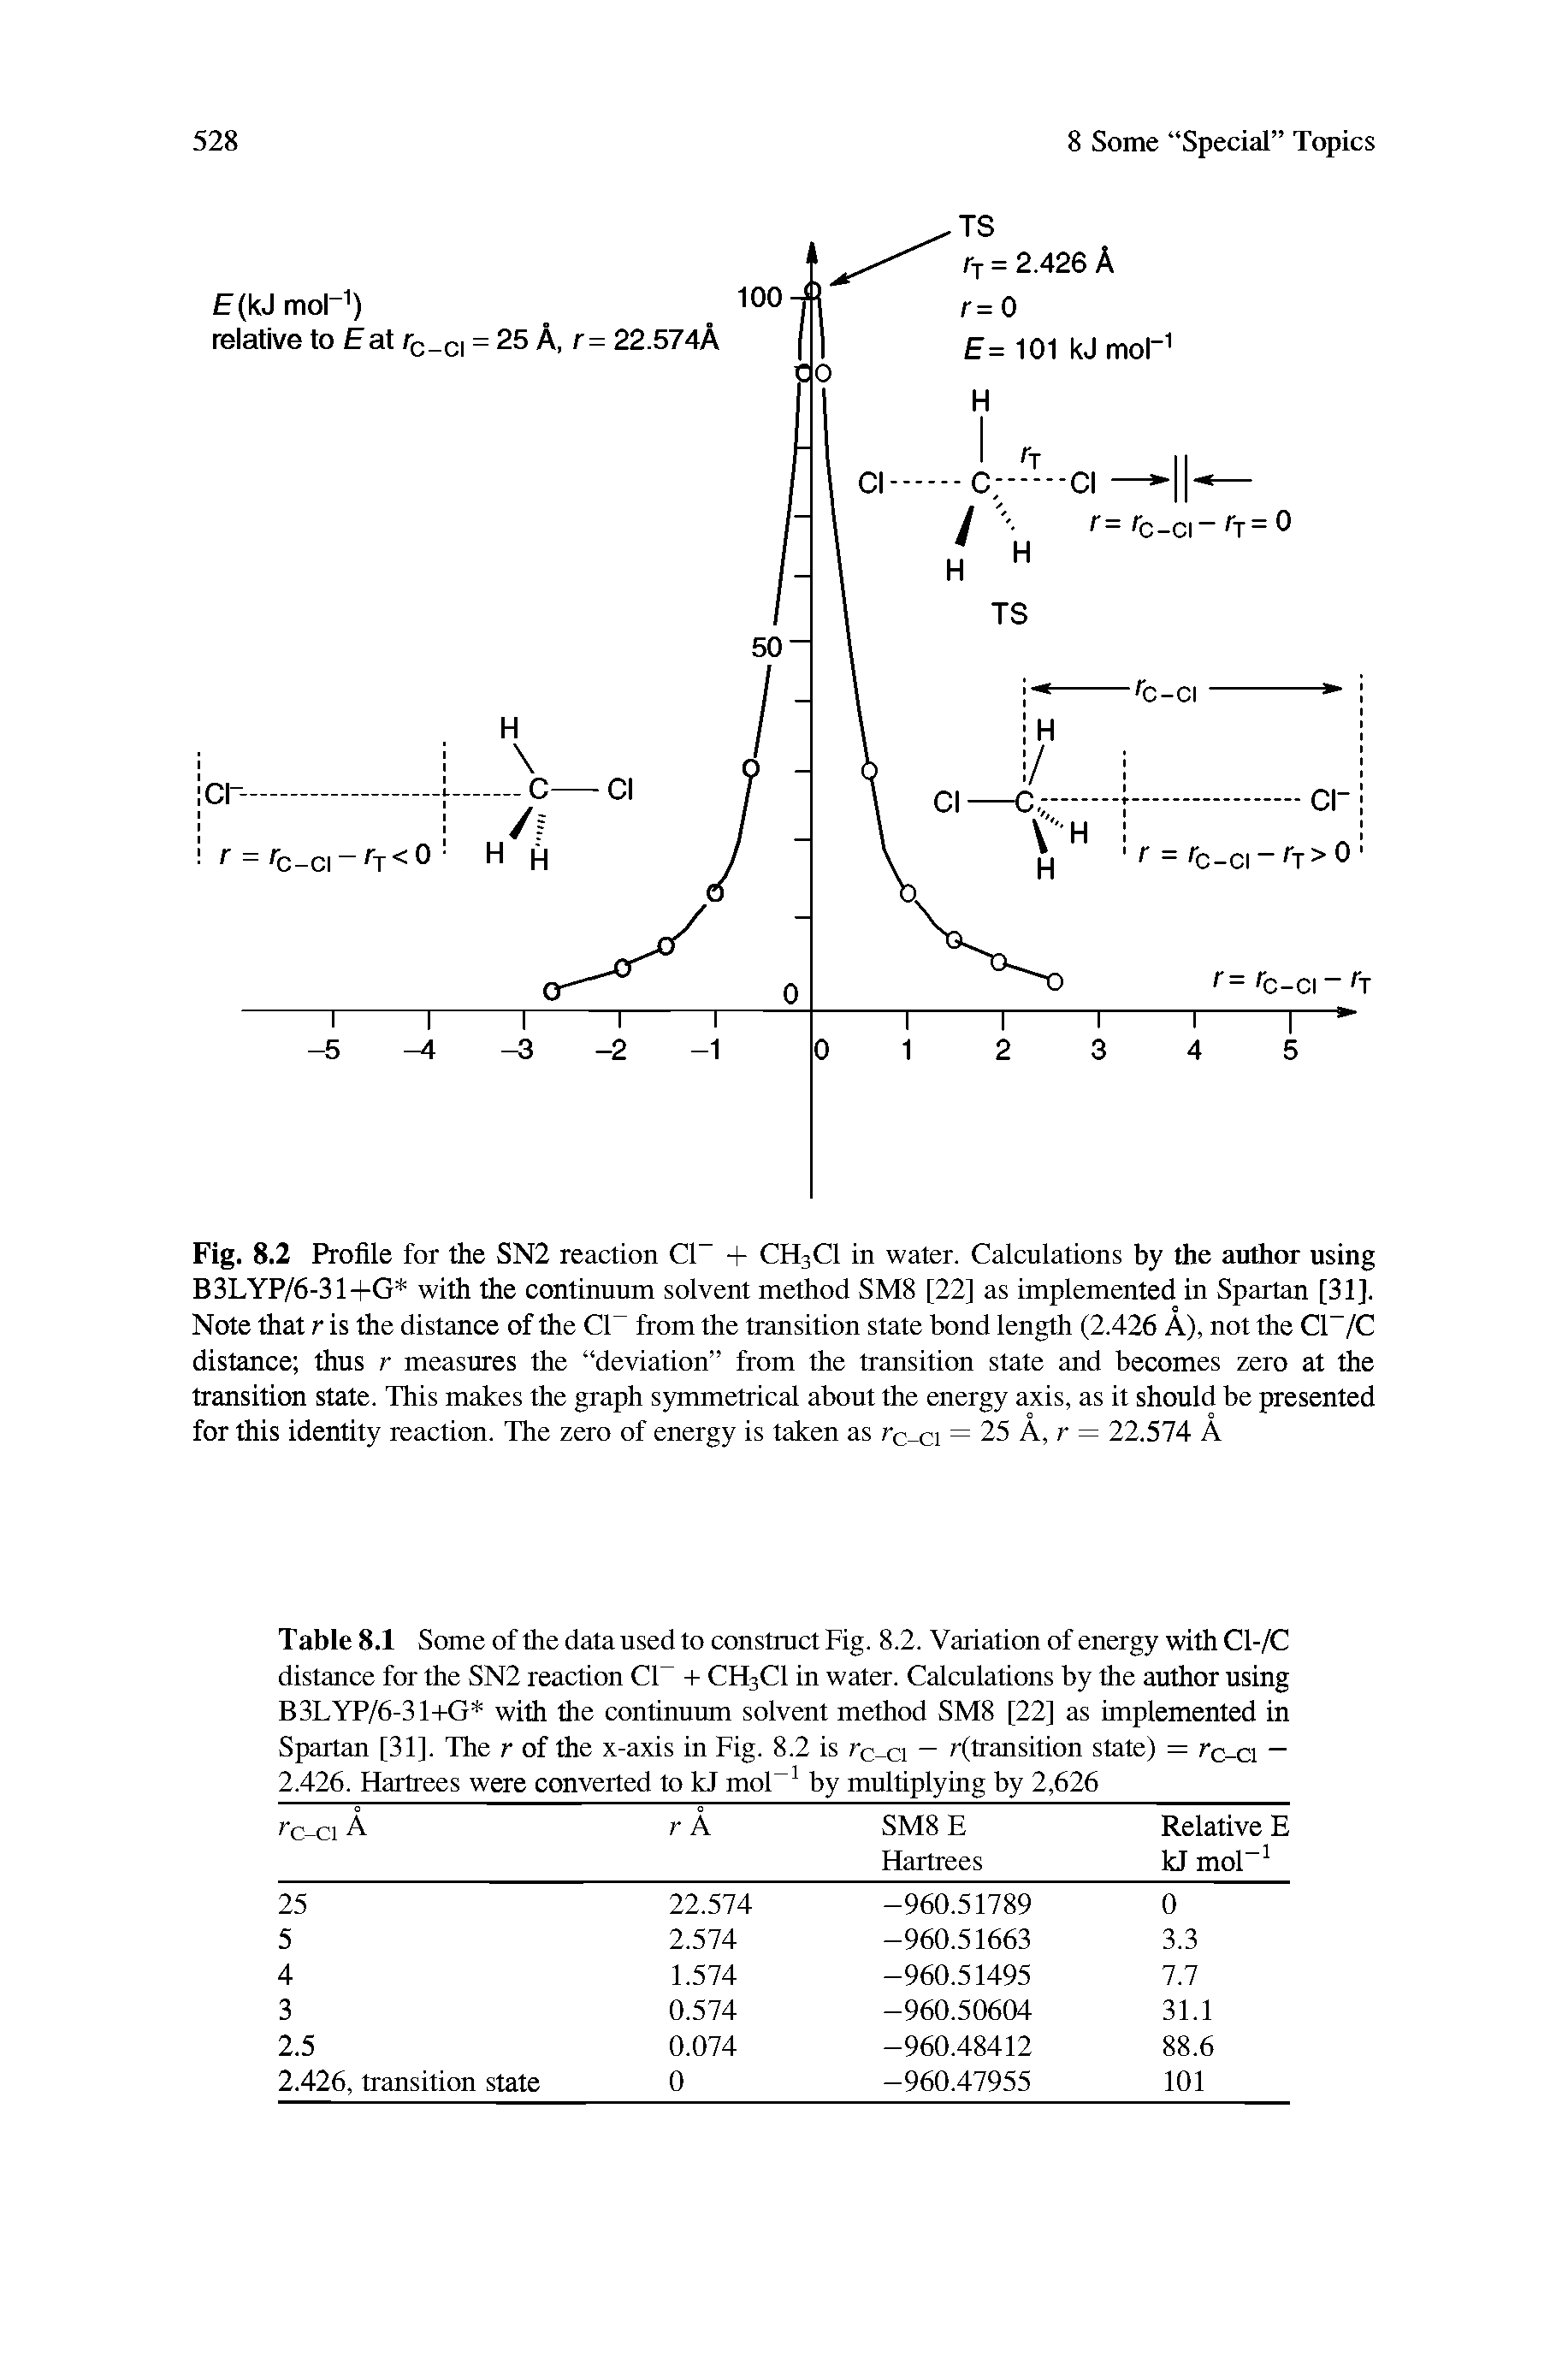 Fig. 8.2 Profile for the SN2 reaction Cl- + CH3C1 in water. Calculations by the author using B3LYP/6-31+G with the continuum solvent method SM8 [22] as implemented in Spartan [31]. Note that r is the distance of the CP from the transition state bond length (2.426 A), not the CP/C distance thus r measures the deviation from the transition state and becomes zero at the transition state. This makes the graph symmetrical about the energy axis, as it should be presented for this identity reaction. The zero of energy is taken as rc cl = 25 A, r = 22.574 A...